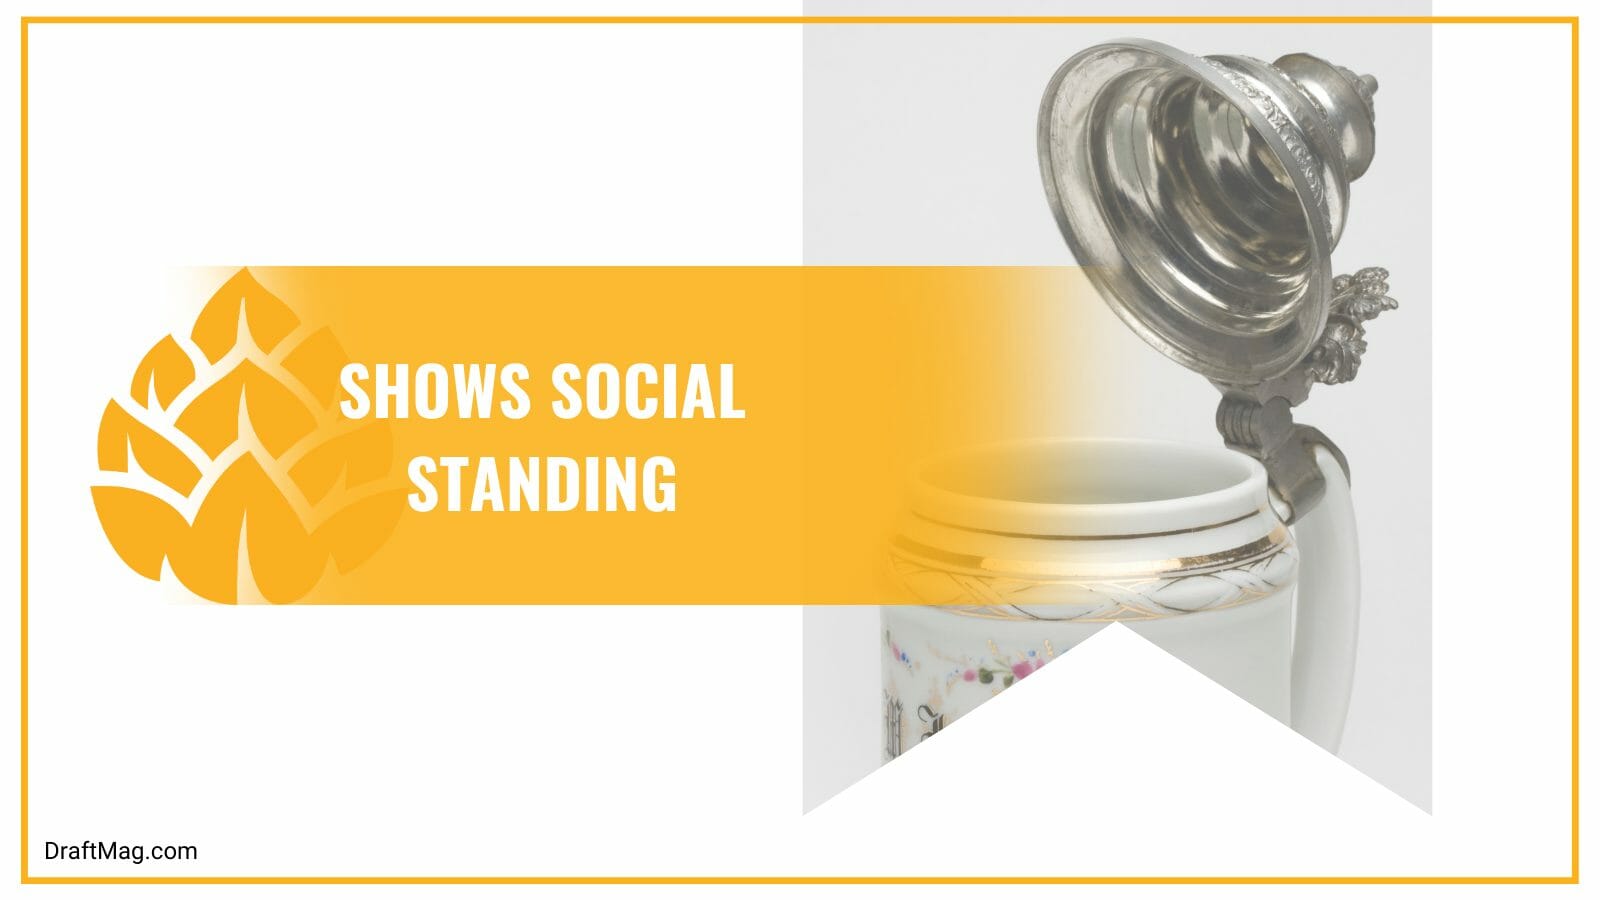 Shows social standing